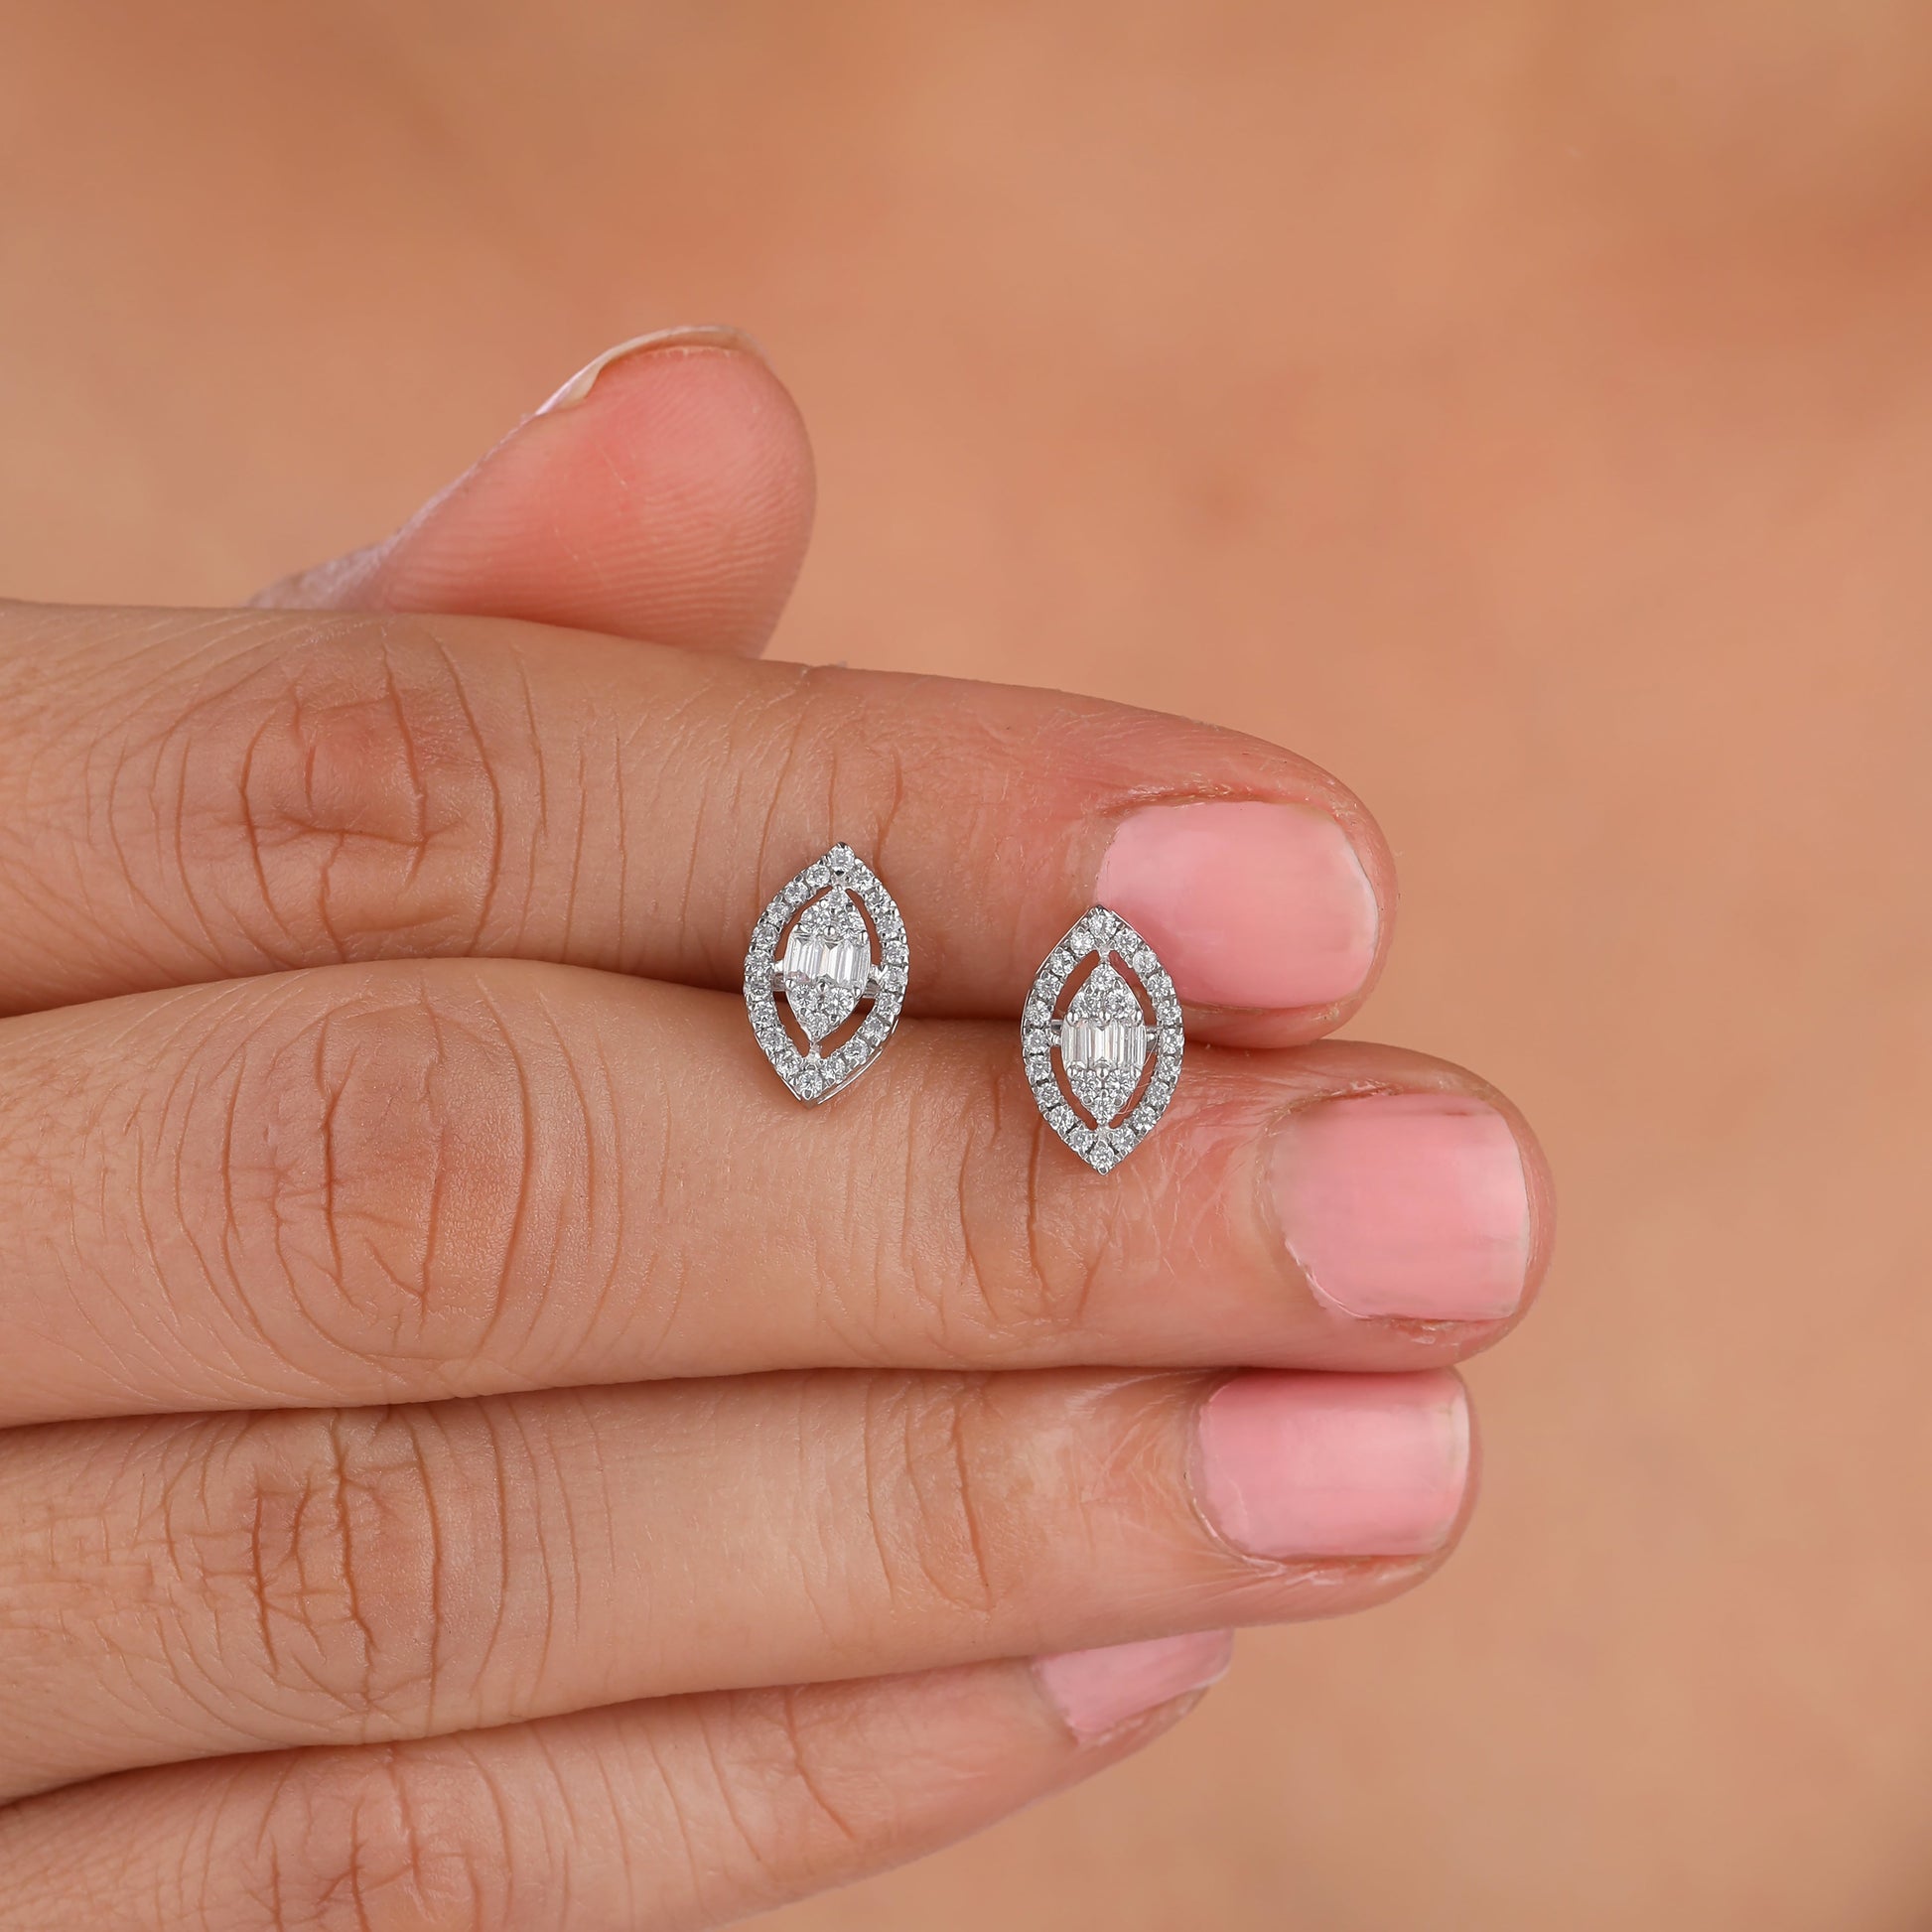 she is holding Marquise illusion Moissanite Stud Halo Earring